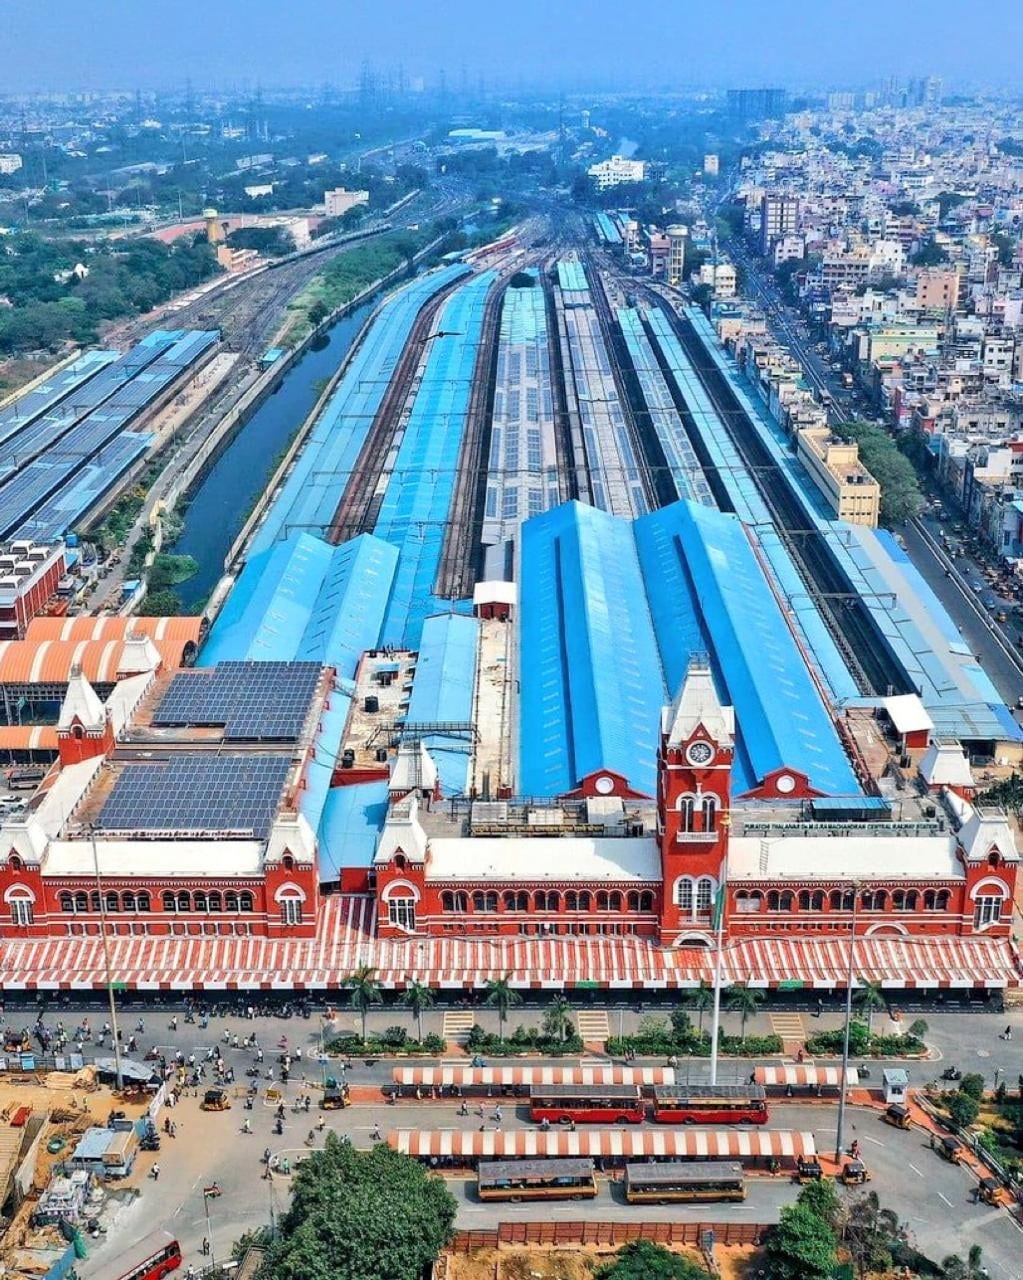 Indian Railways' Chennai Central Station is Now Fully Powered by Solar Energy; See Photos